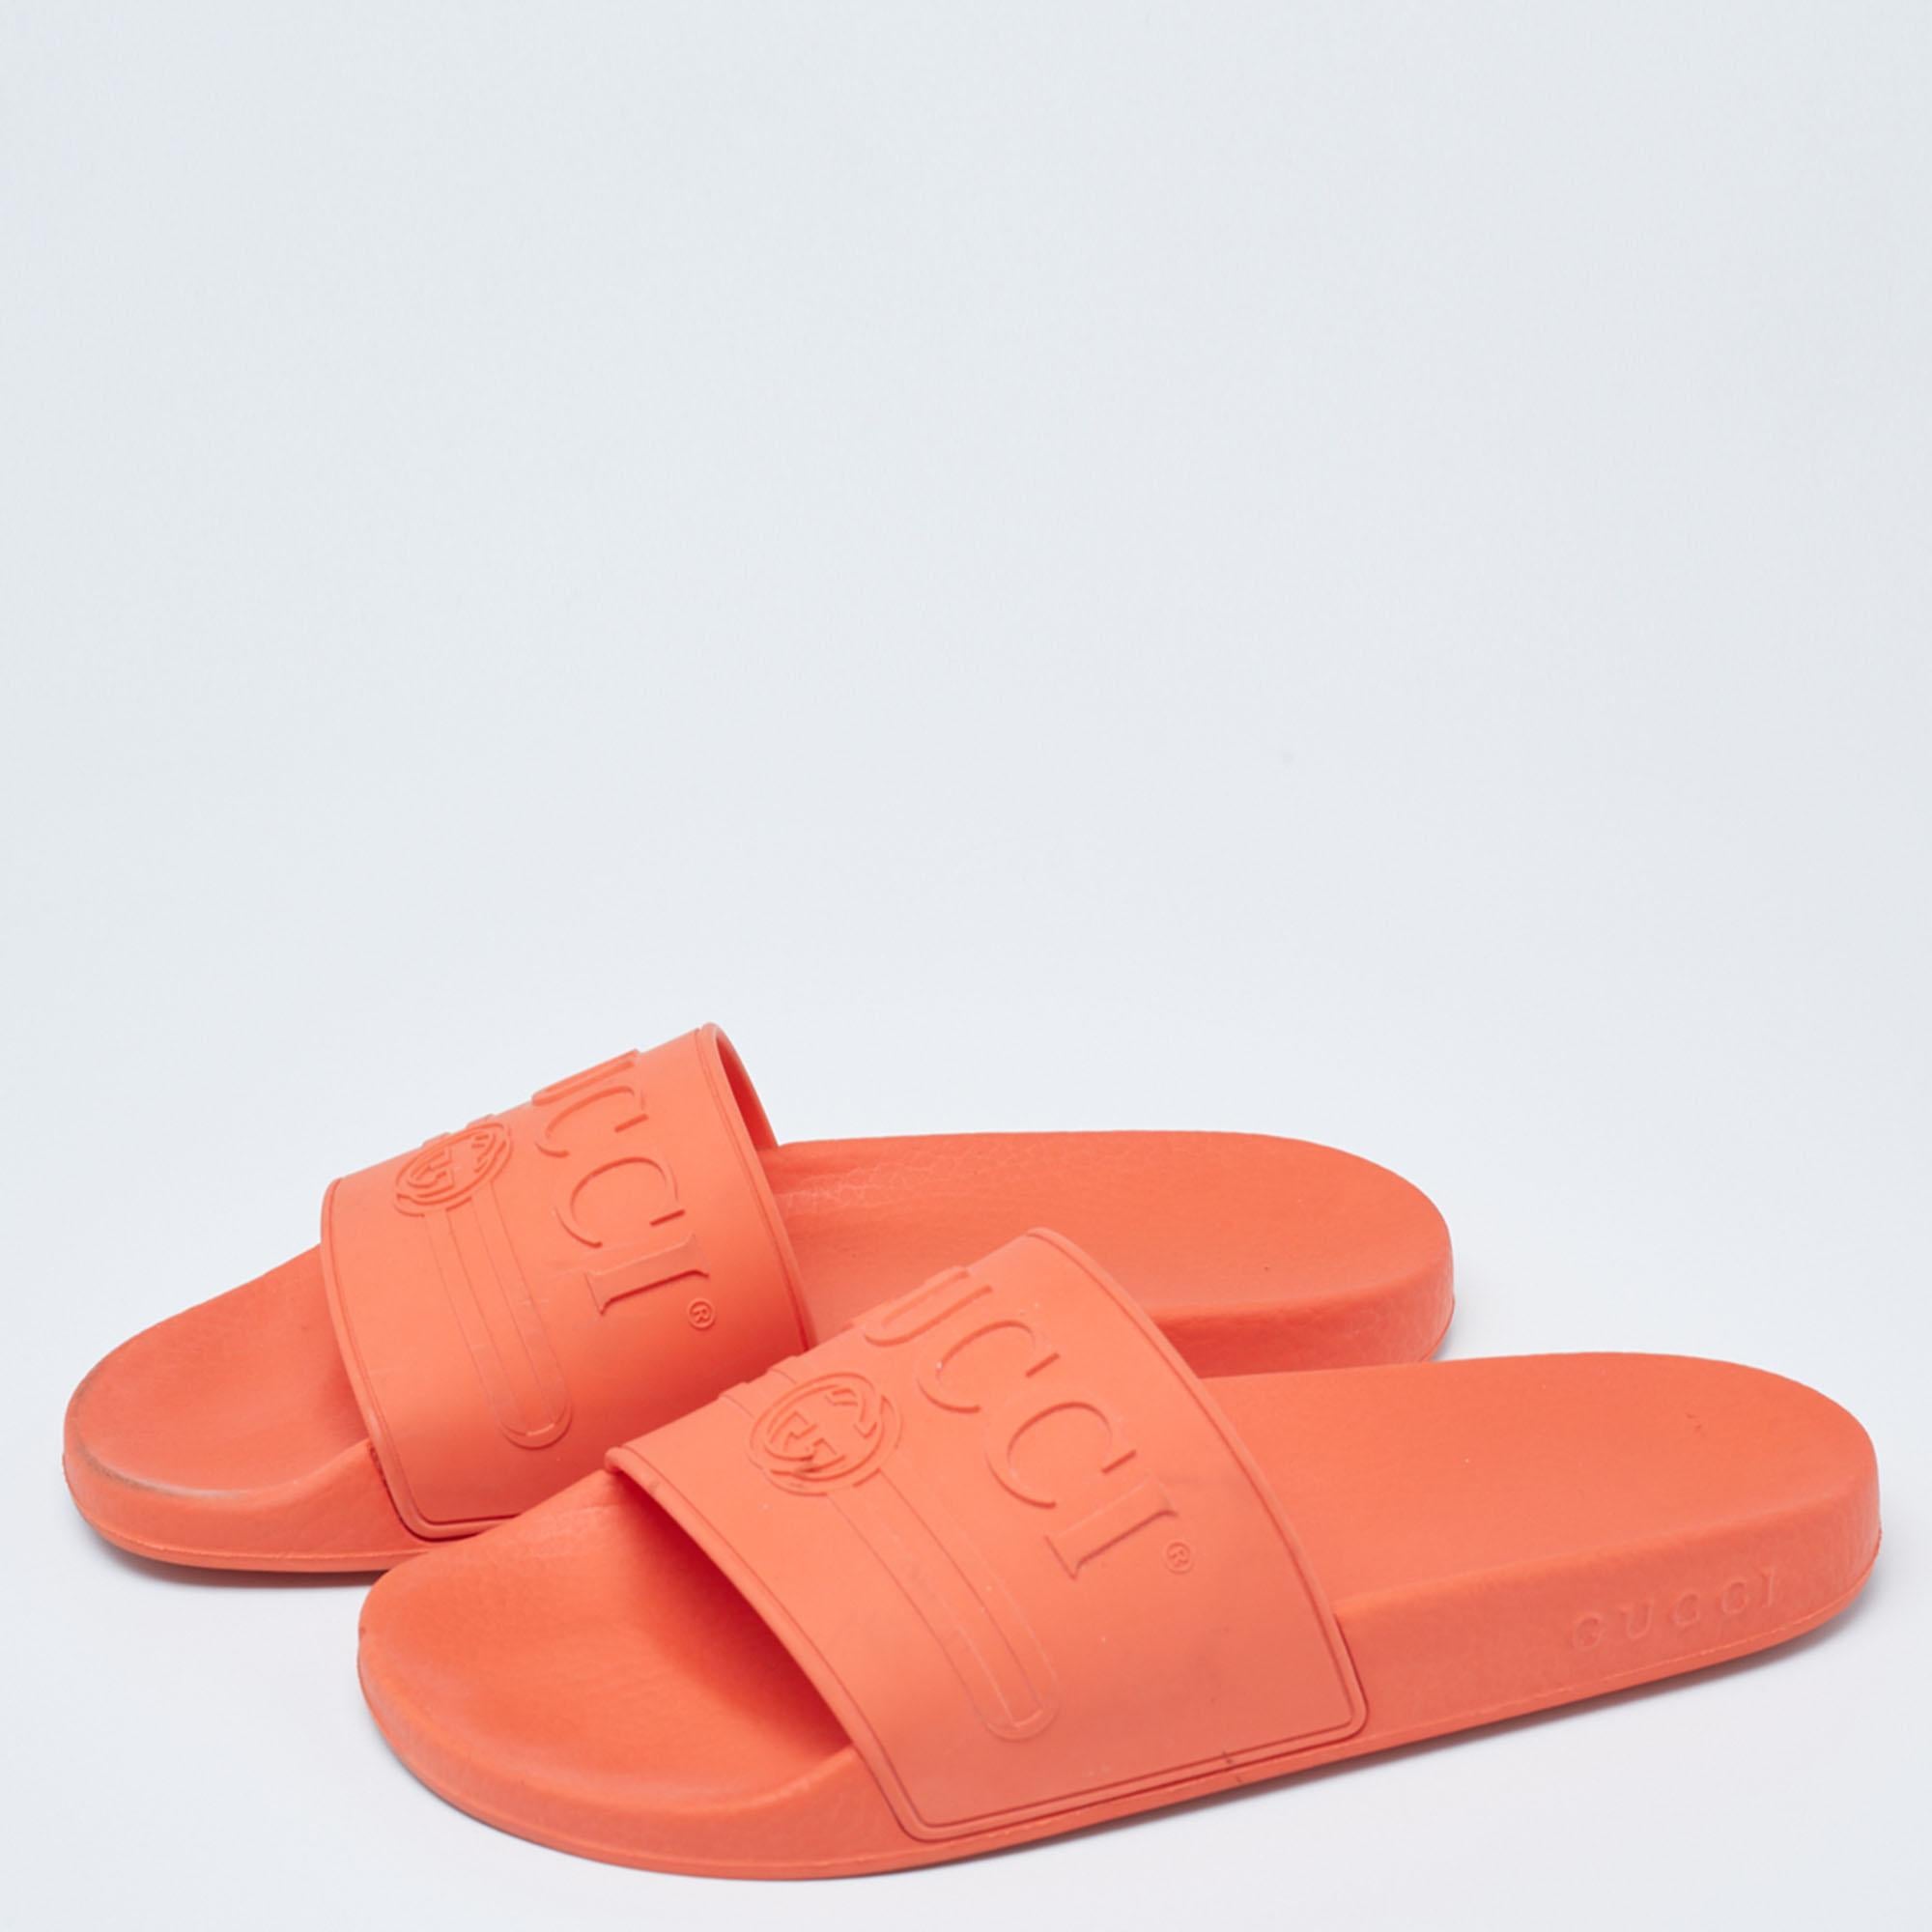 Minimal design and optimal comfort are the special features of these Gucci slides. They come crafted from rubber and feature an open-toe silhouette. They are styled with wide vamp straps that are detailed with the brand logo. They are endowed with